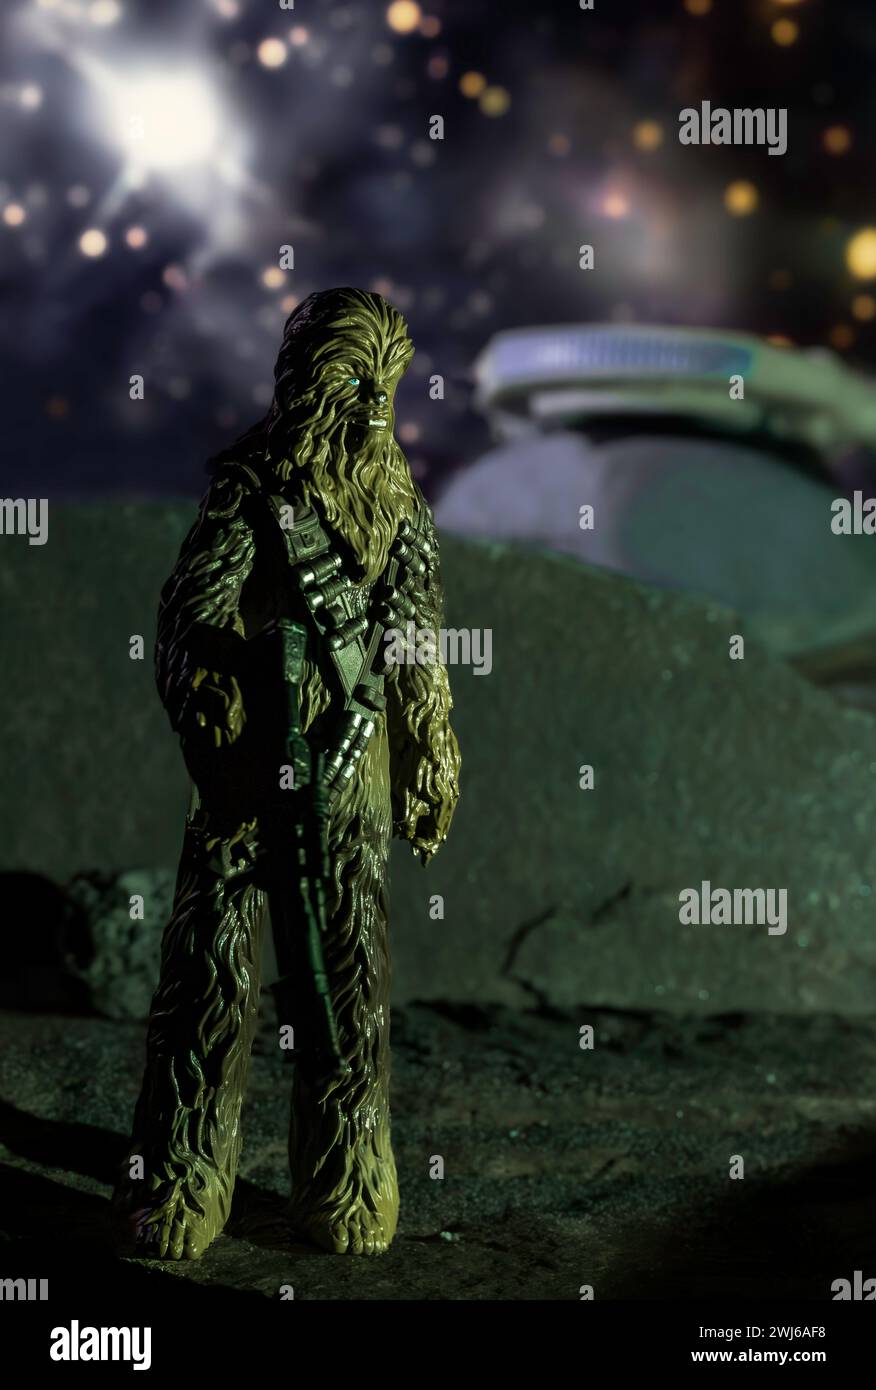 Chewbacca figure placed on a rocky planet with the Millennium Falcon in the background against a starry sky Stock Photo